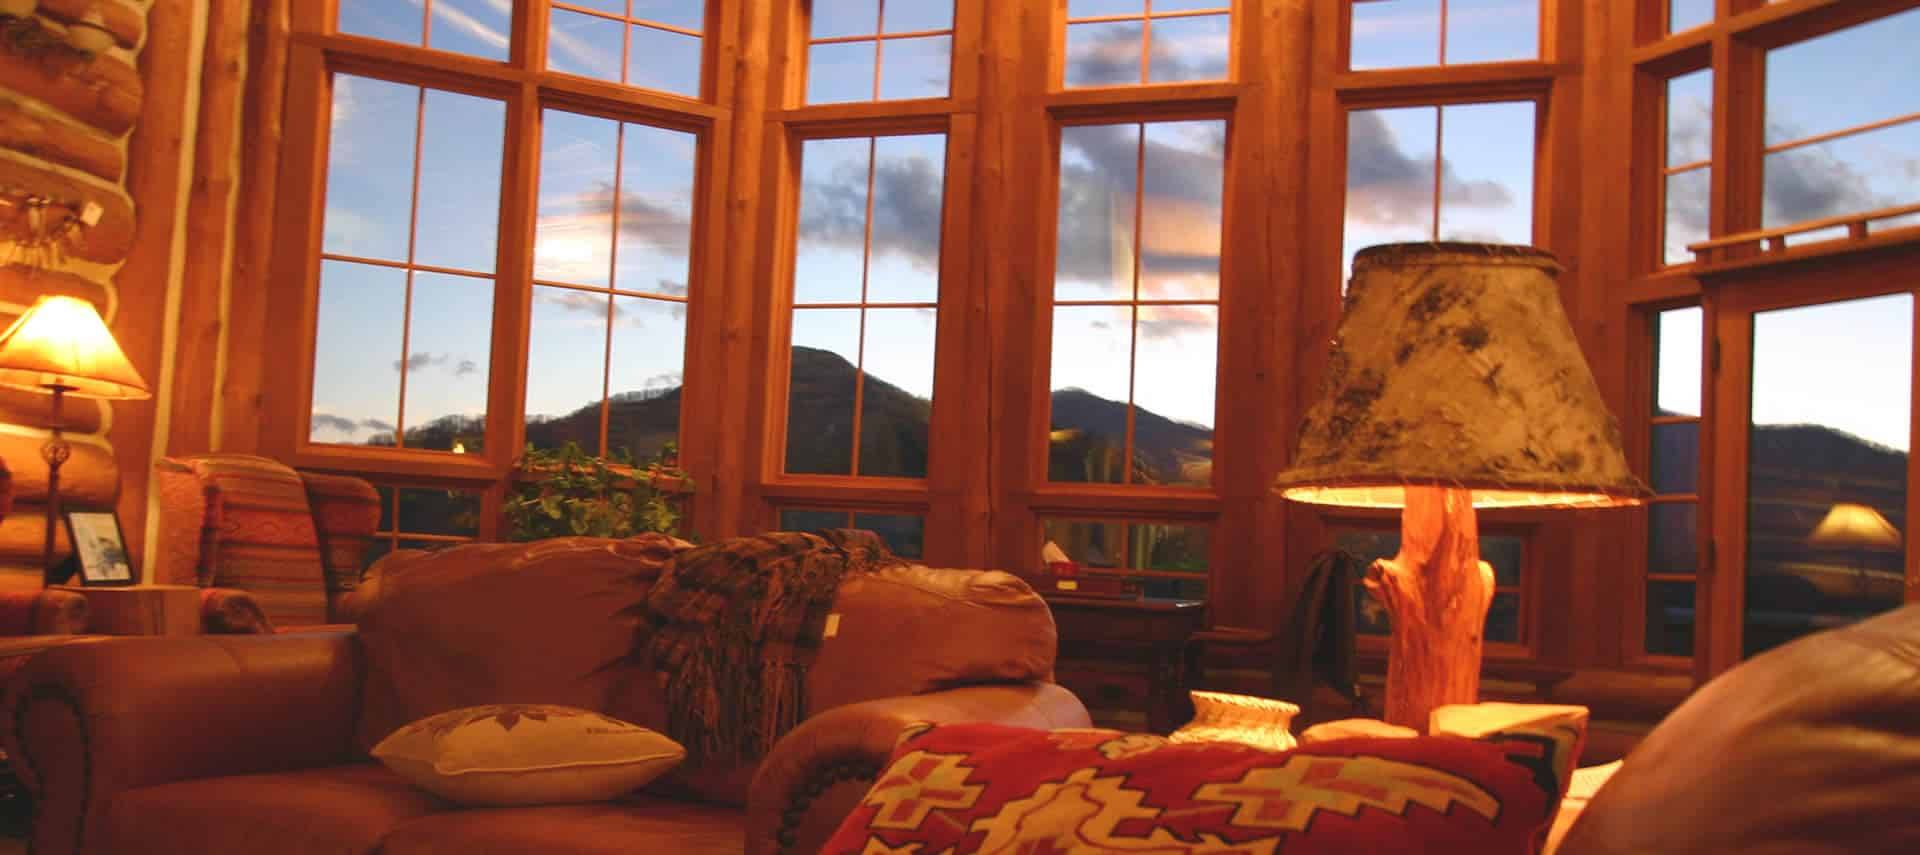 Warm interior living space with leather furniture looks out windows to mountains. 